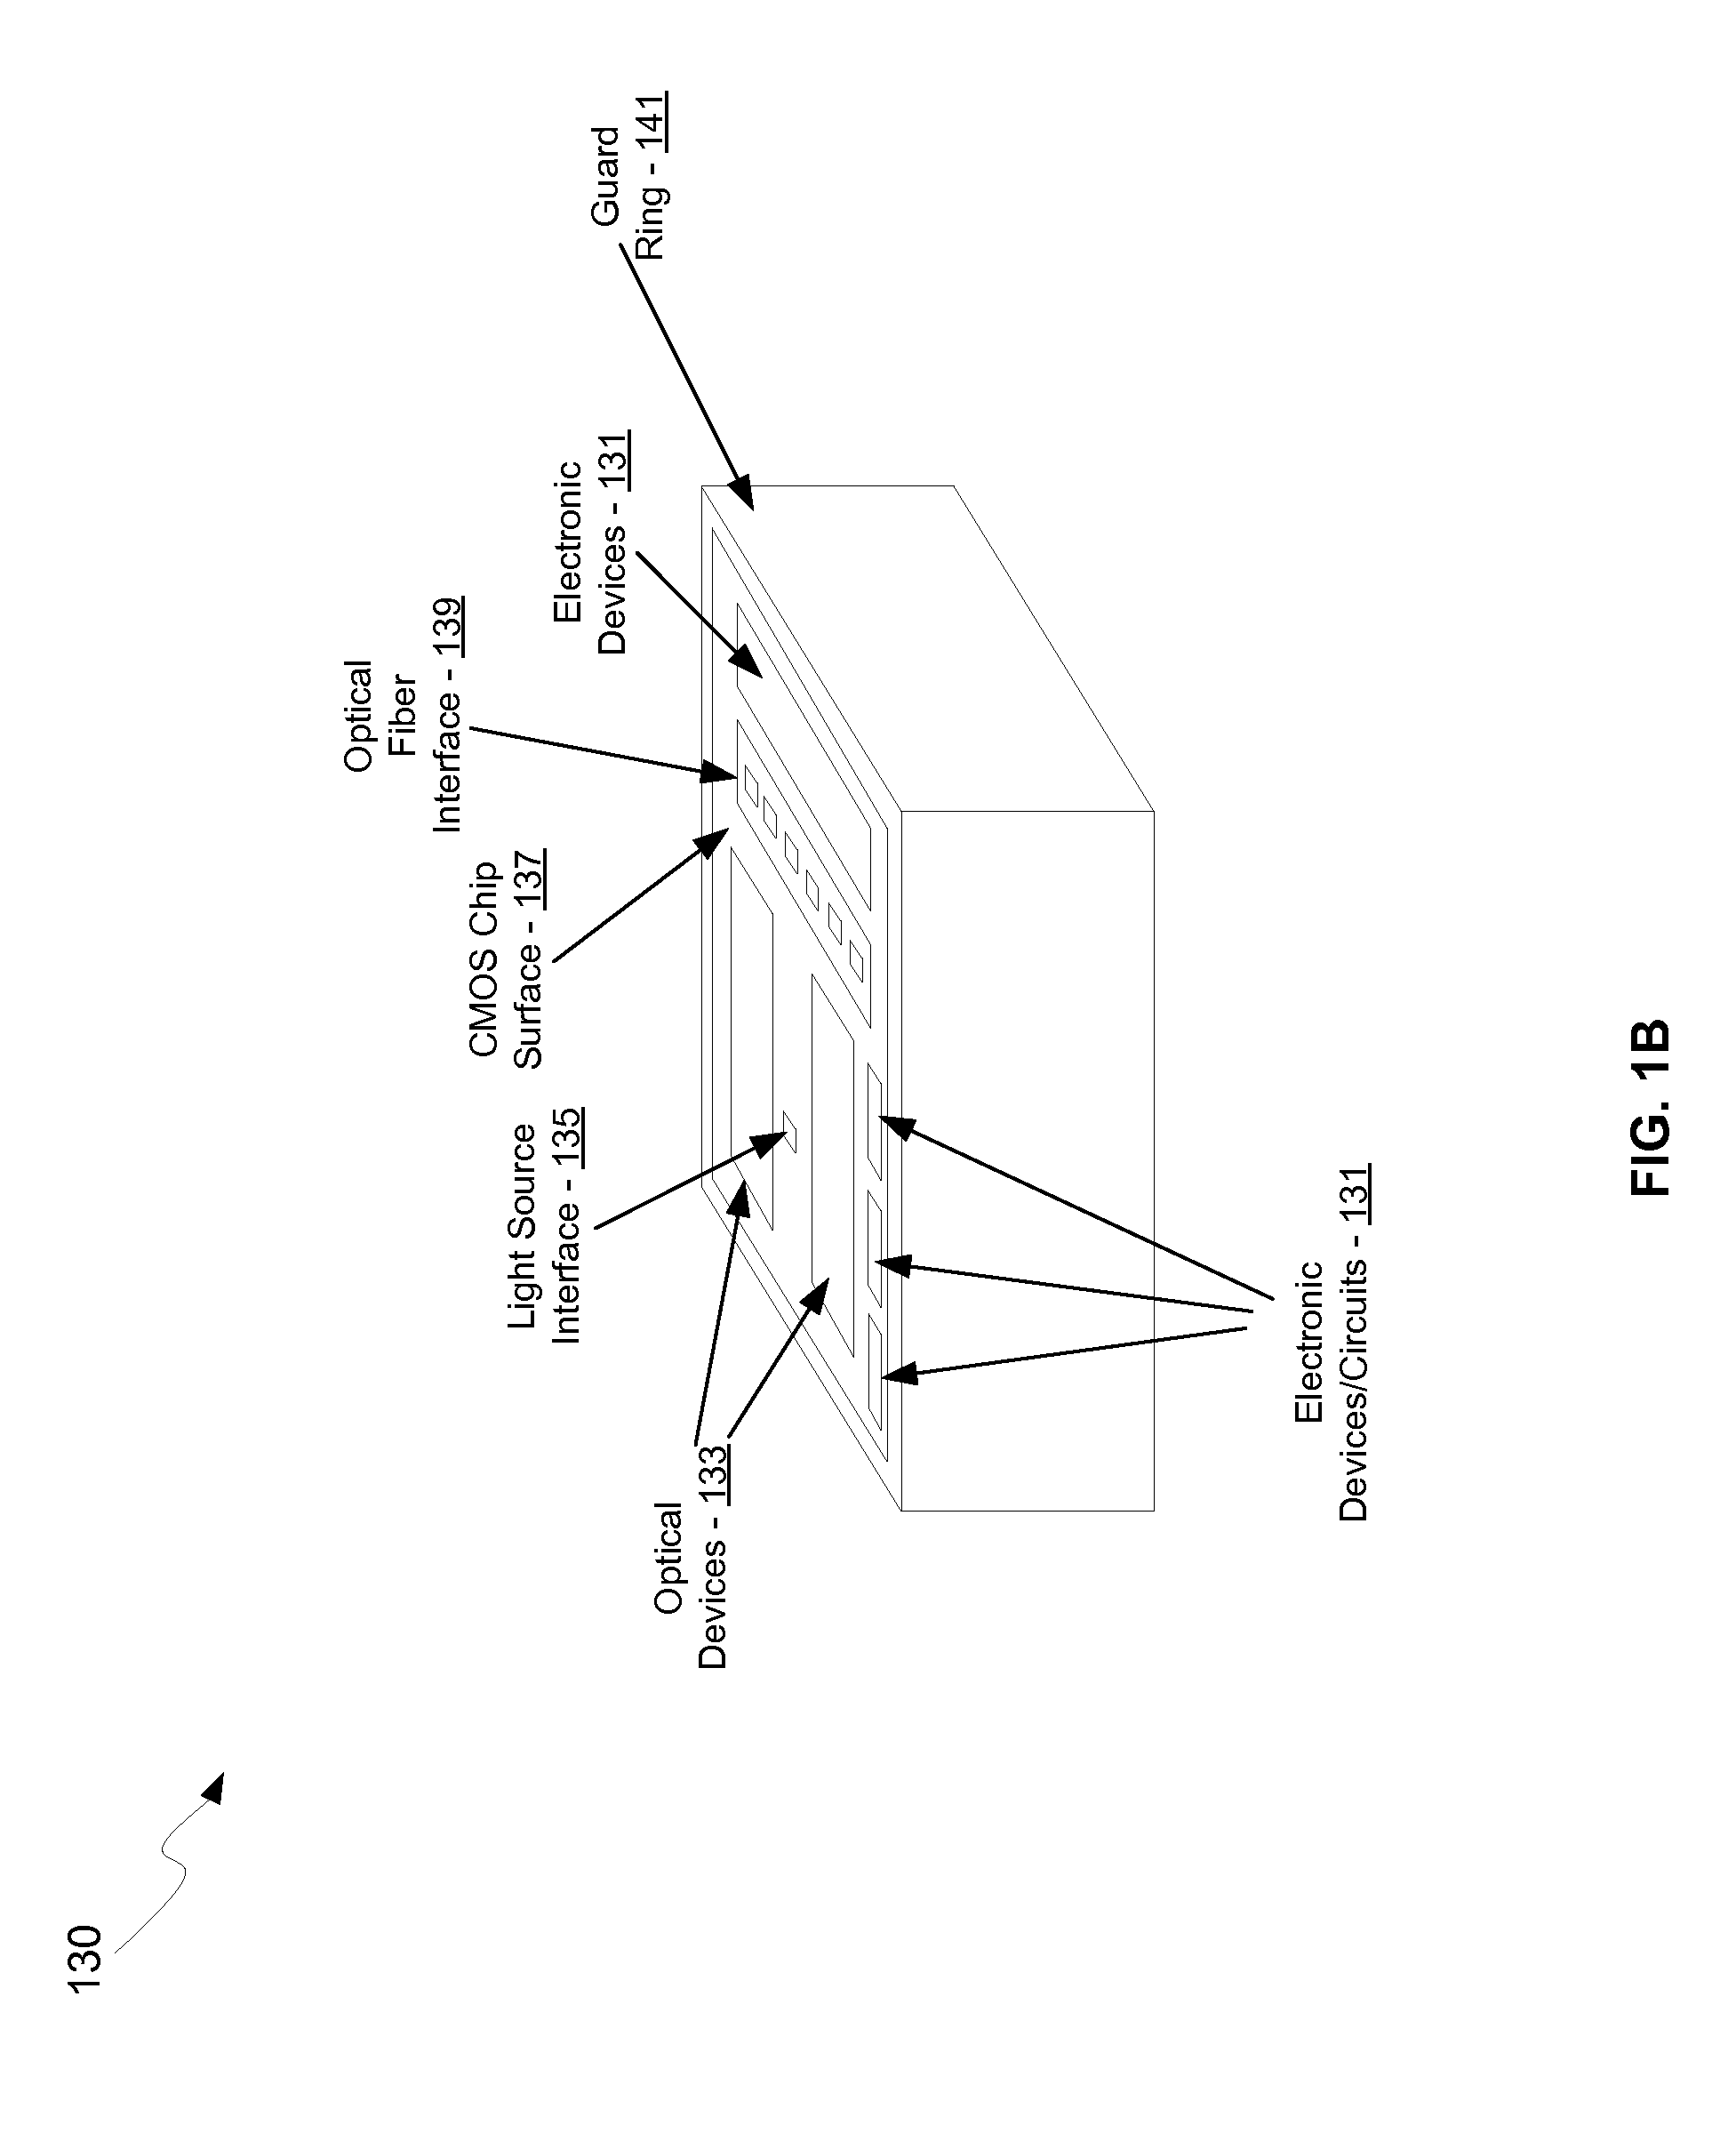 Method And System For Coupling A Light Source Assembly To An Optical Integrated Circuit